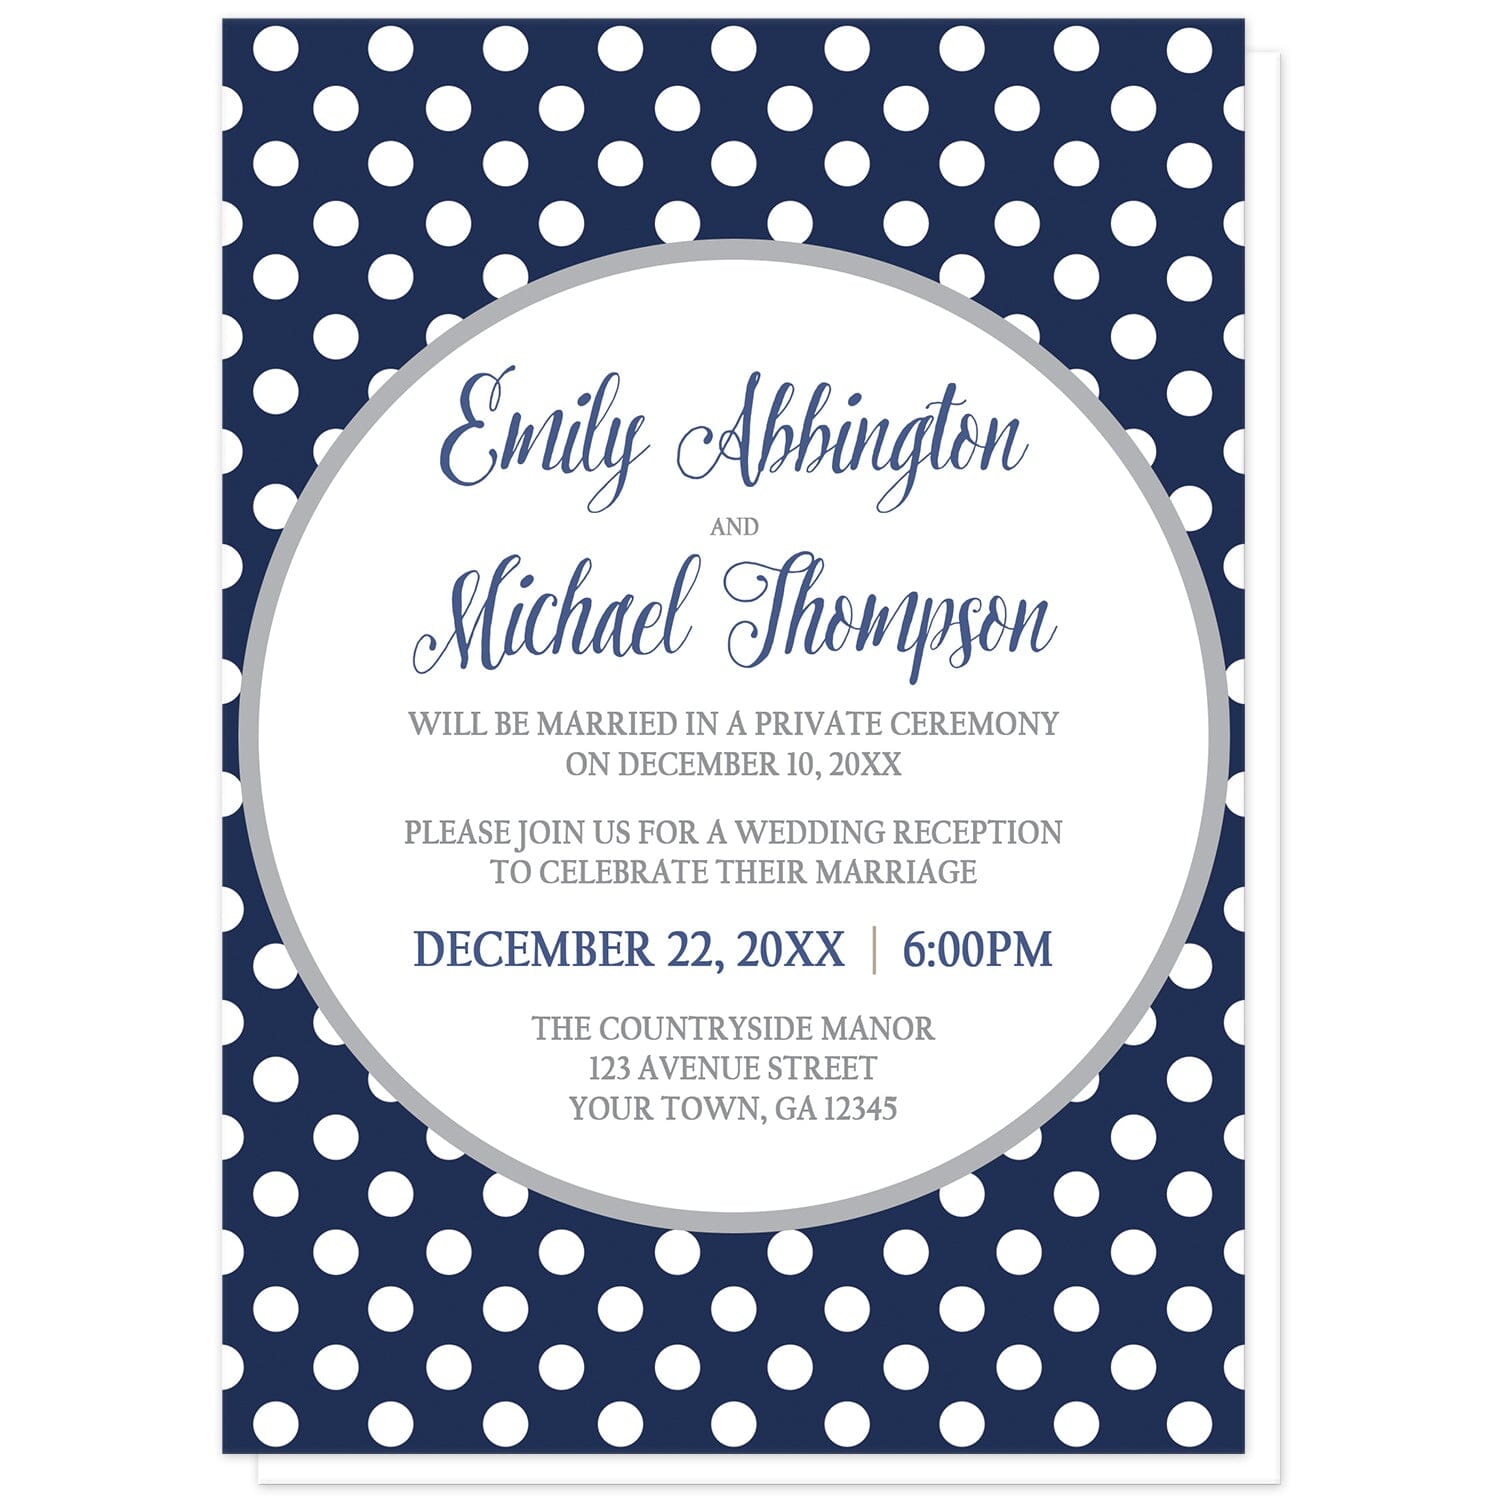 Gray Navy Blue Polka Dot Reception Only Invitations at Artistically Invited. Gray navy blue polka dot reception only invitations with your personalized post-wedding reception celebration details custom printed in navy blue and gray inside a white circle outlined in light gray, over a navy blue polka dot pattern with white polka dots over blue.